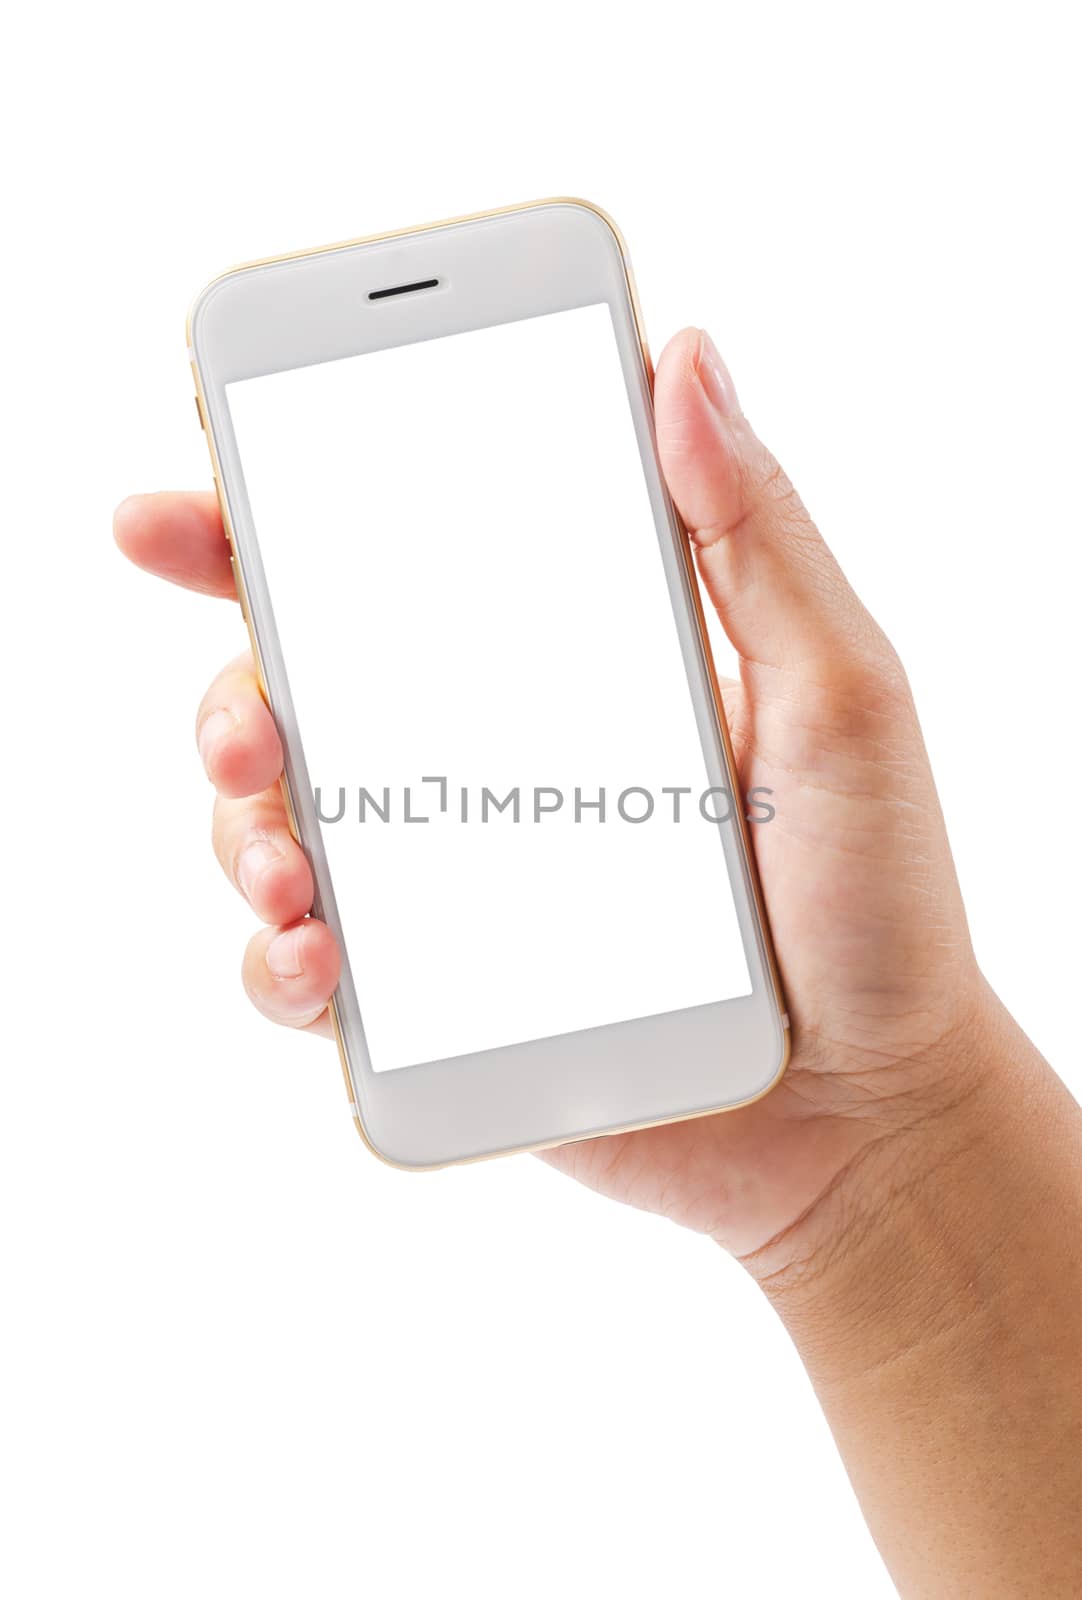 closeup hand using phone isolated on white background, save clipping patch inside.